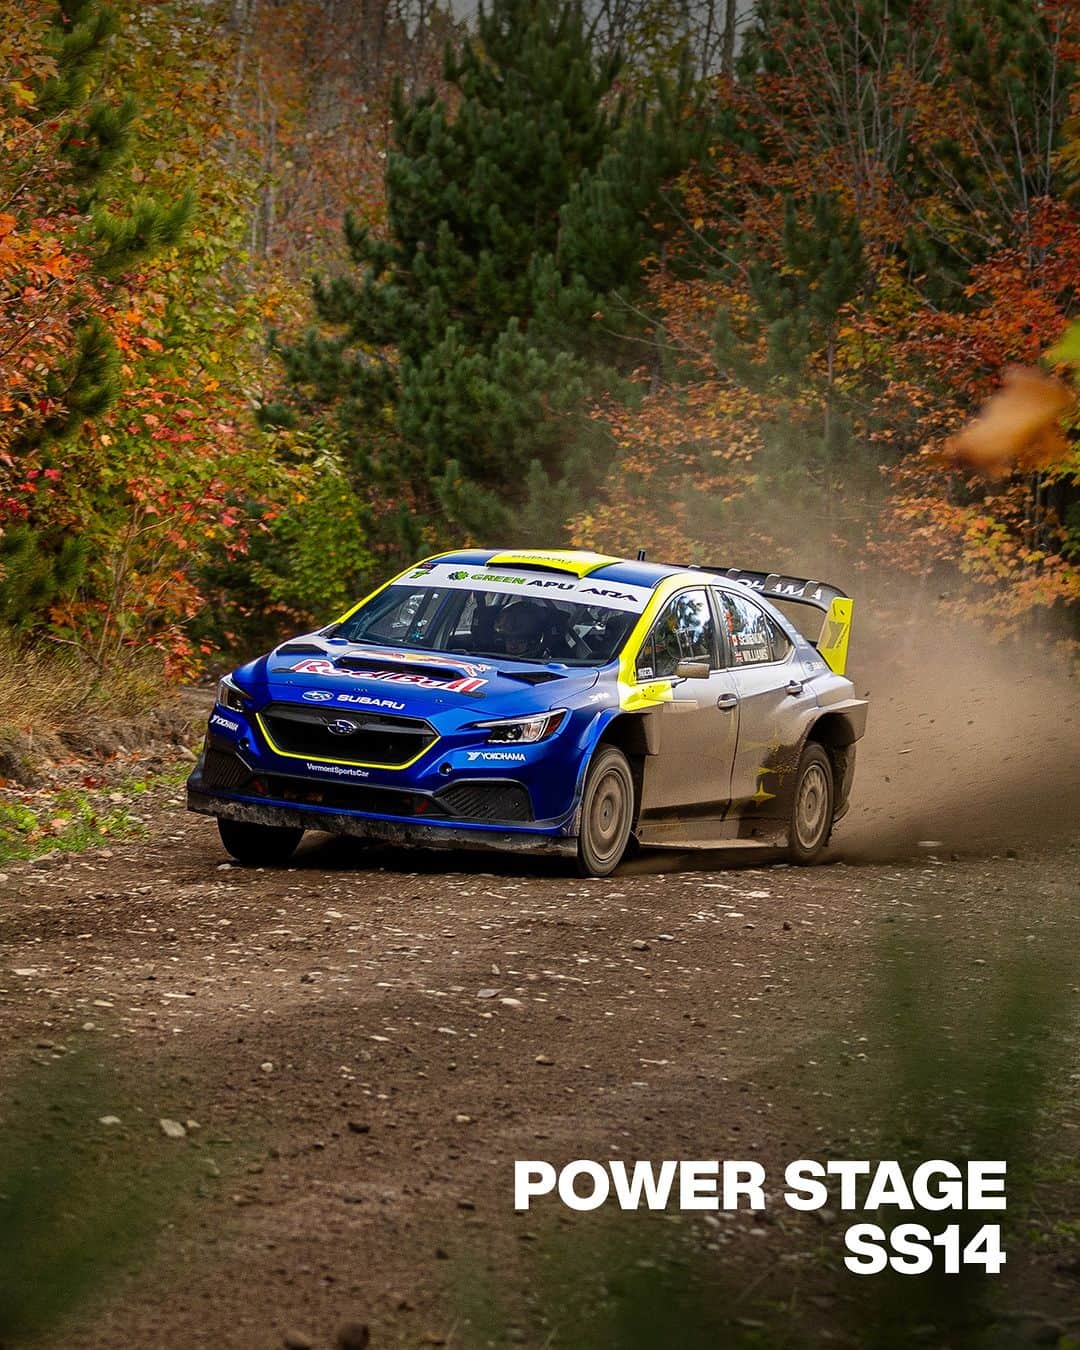 Subaru Rally Team USAさんのインスタグラム写真 - (Subaru Rally Team USAInstagram)「We are just a few hours away from the start of the final round of the 2023 ARA National Championship season: @lakesuperiorperformancerally. Join us at Fox Marquette Subaru for Parc Expose at 9:30am ET. Stick around later for the ceremonial start.  Lake Superior Performance Rally 2023 (LSPR) Oct 13-14, 2023 Marquette, Michigan  Time Zone: Eastern Daylight Time (UTC -4) Nearest Int'l Airport: Sawyer Intl Airport (MQT) Weather: Cloudy with occasional rain showers. High near 50F. Low around 45F. Sunset 7:05pm.  📝 Stage info: Total Distance: 342.6 miles Number of stages: 17 Stage distance: 126.6 miles Stage surfaces: Gravel Longest stage: 12.35 miles (SS3/7 Far Point I/II) Highest Elevation: 1,833 ft Recce: Open Service Parks: Camp Sidnaw (Fri), Aspen Ridge Elementary School (Sat) Official Start: 1:50pm on Friday Superspecial: Yes (SS17) Power Stage: SS14 Stages in darkness: Yes (SS5-8 & 17)  Powered by: #subaru #yokohama #motul #redbullcanada #weboost #peplink #attbusiness #triplerlights #r53suspension #sparco #dirtfish #vermontsportscar  Photo: @matthew.stryker」10月13日 21時01分 - subarumotorsportsusa